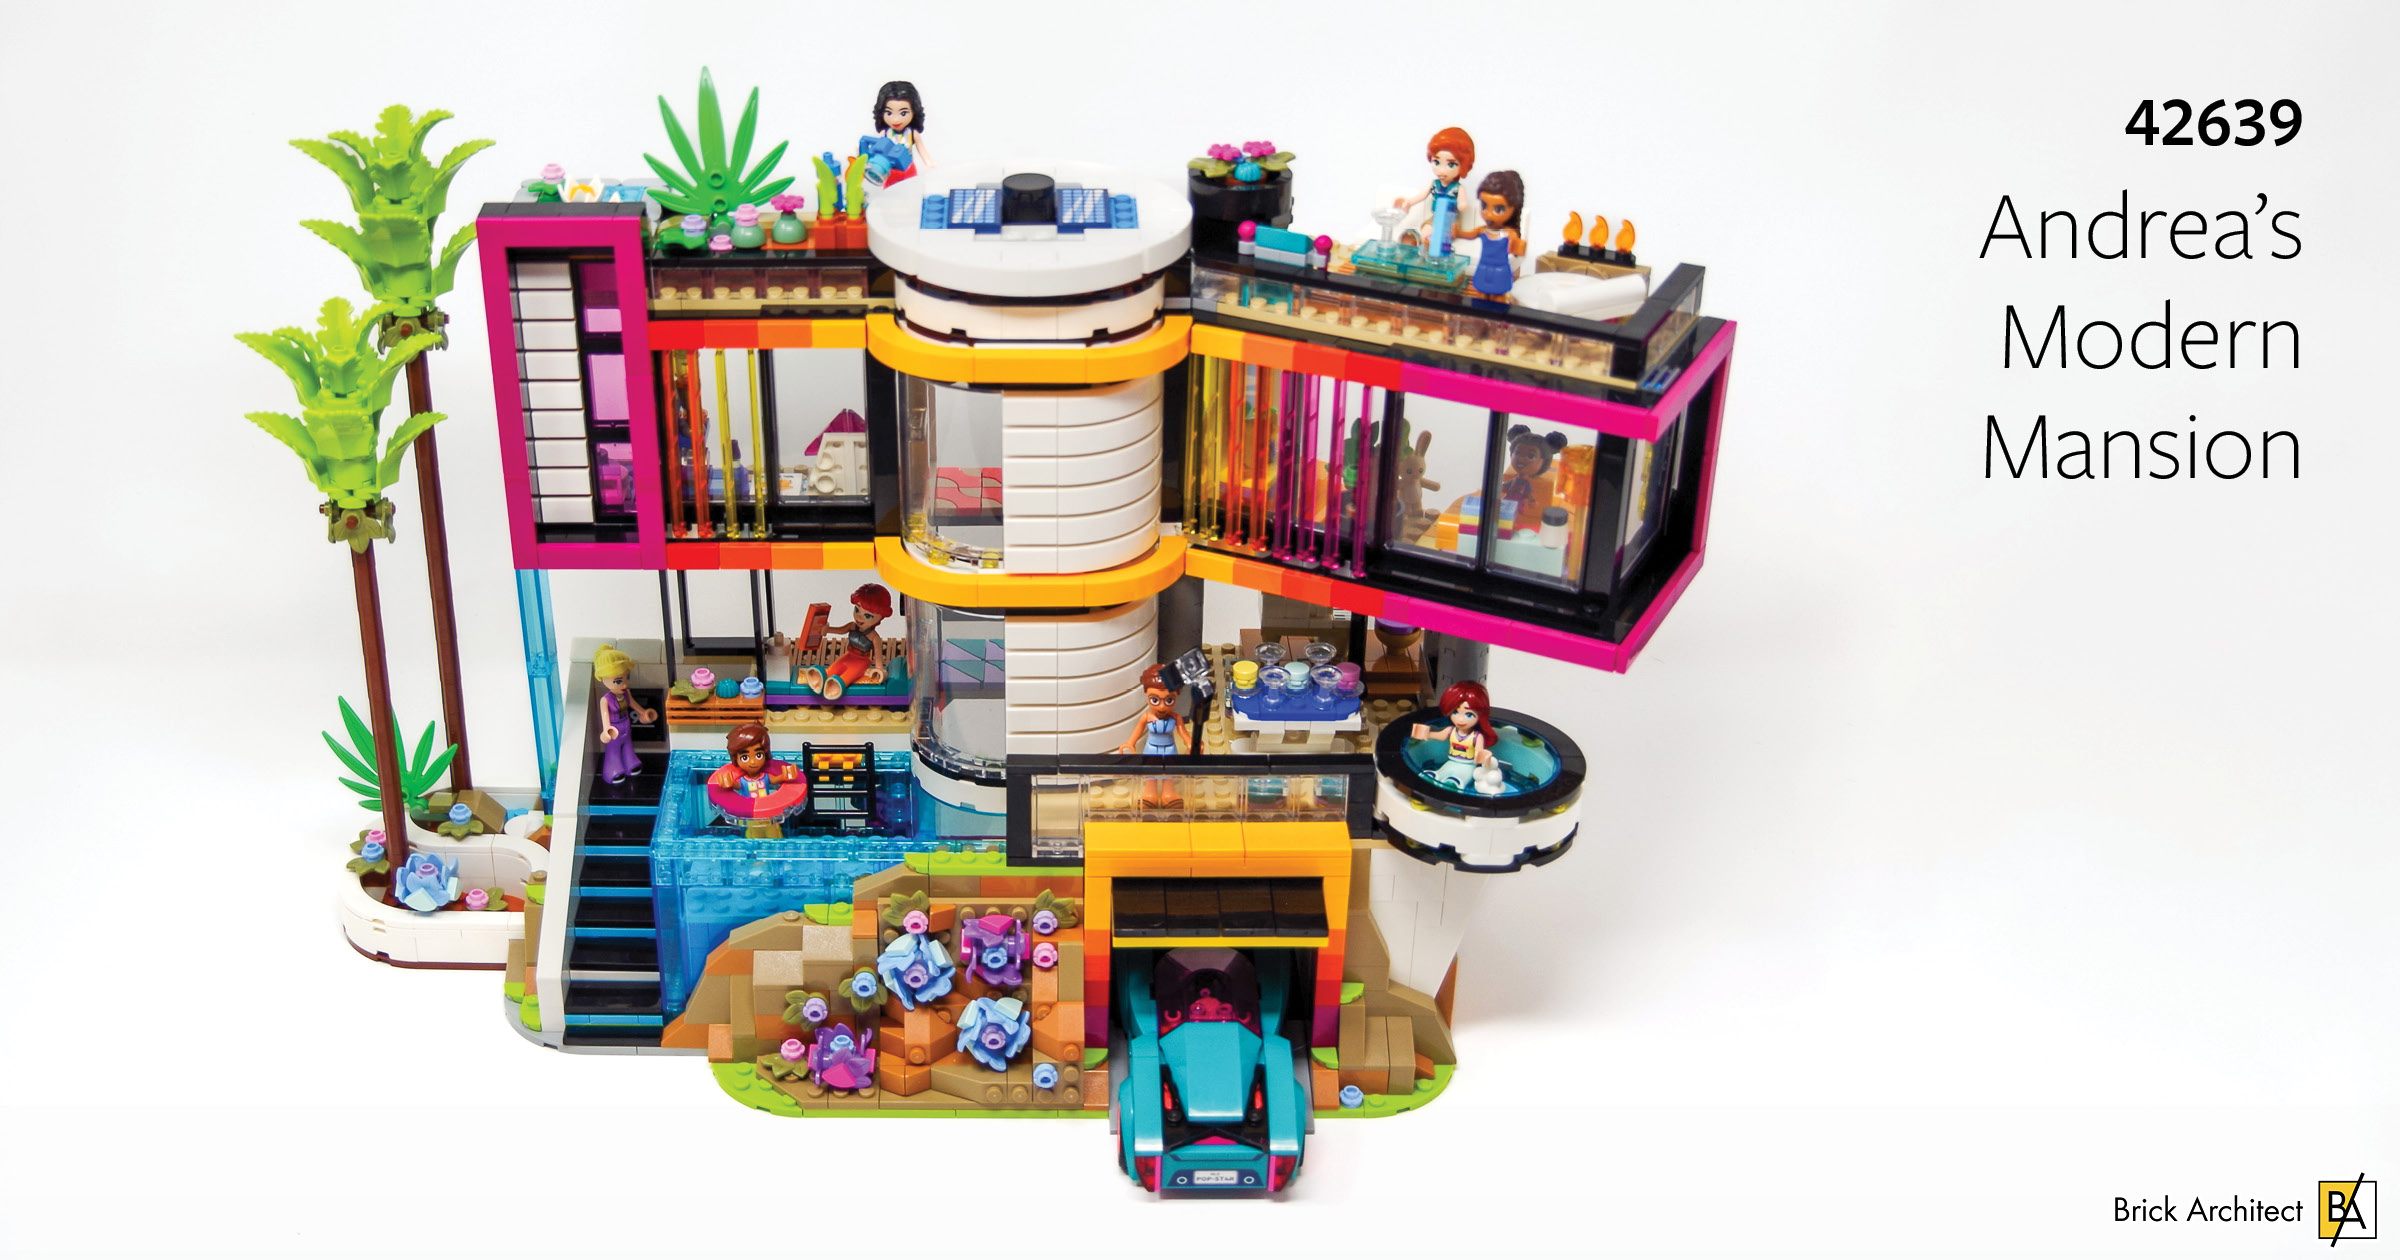 Review: #42639 Andrea’s Modern Mansion